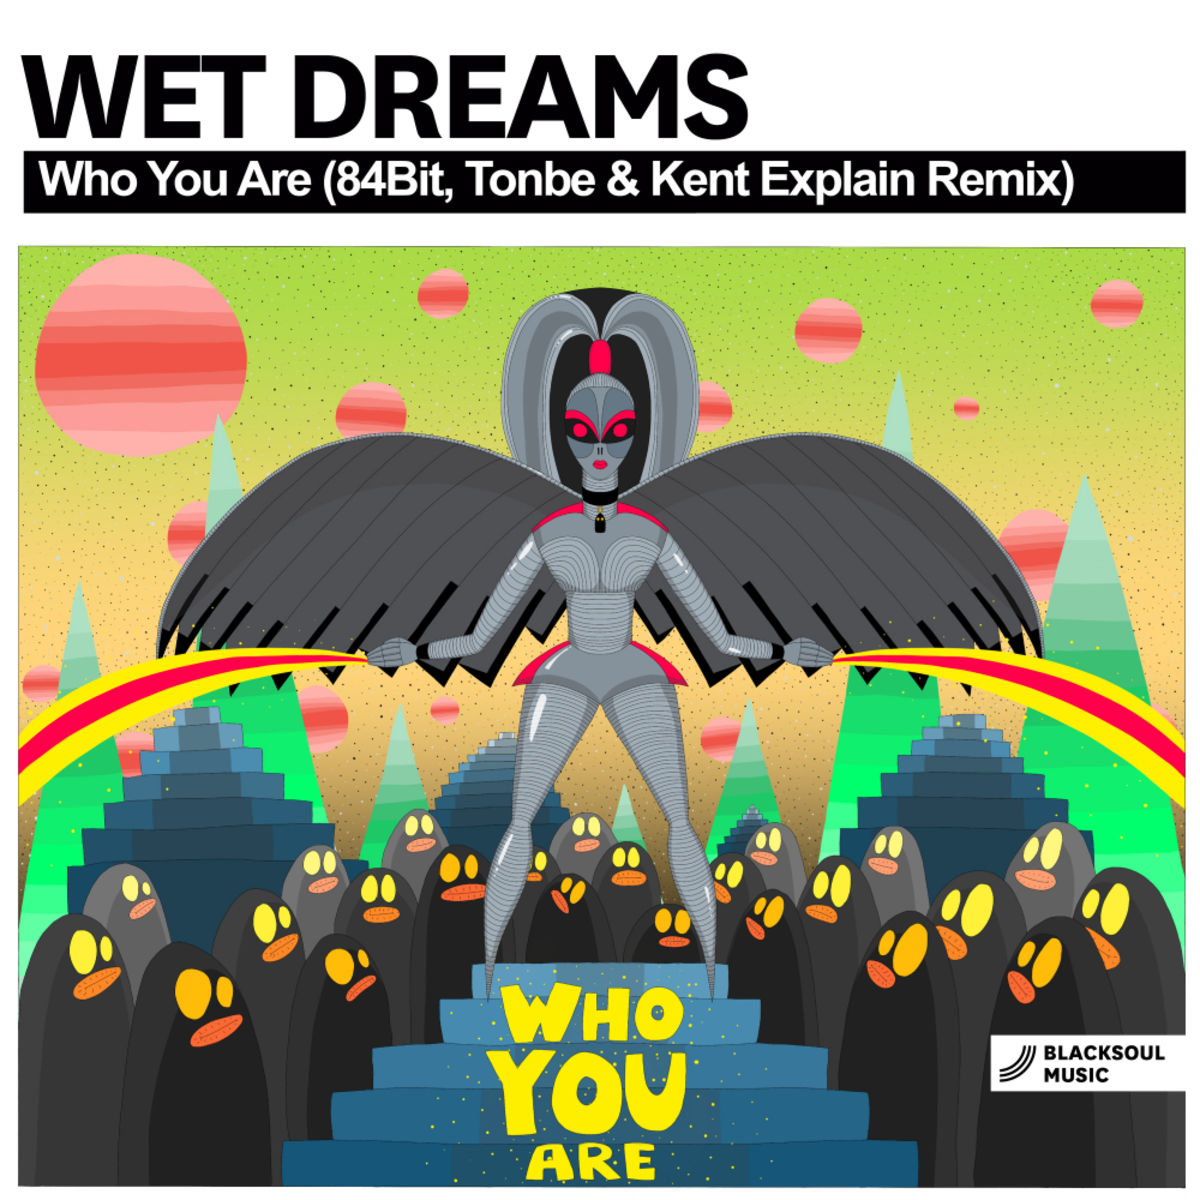 Wet Dreams - Who You Are / Blacksoul Music